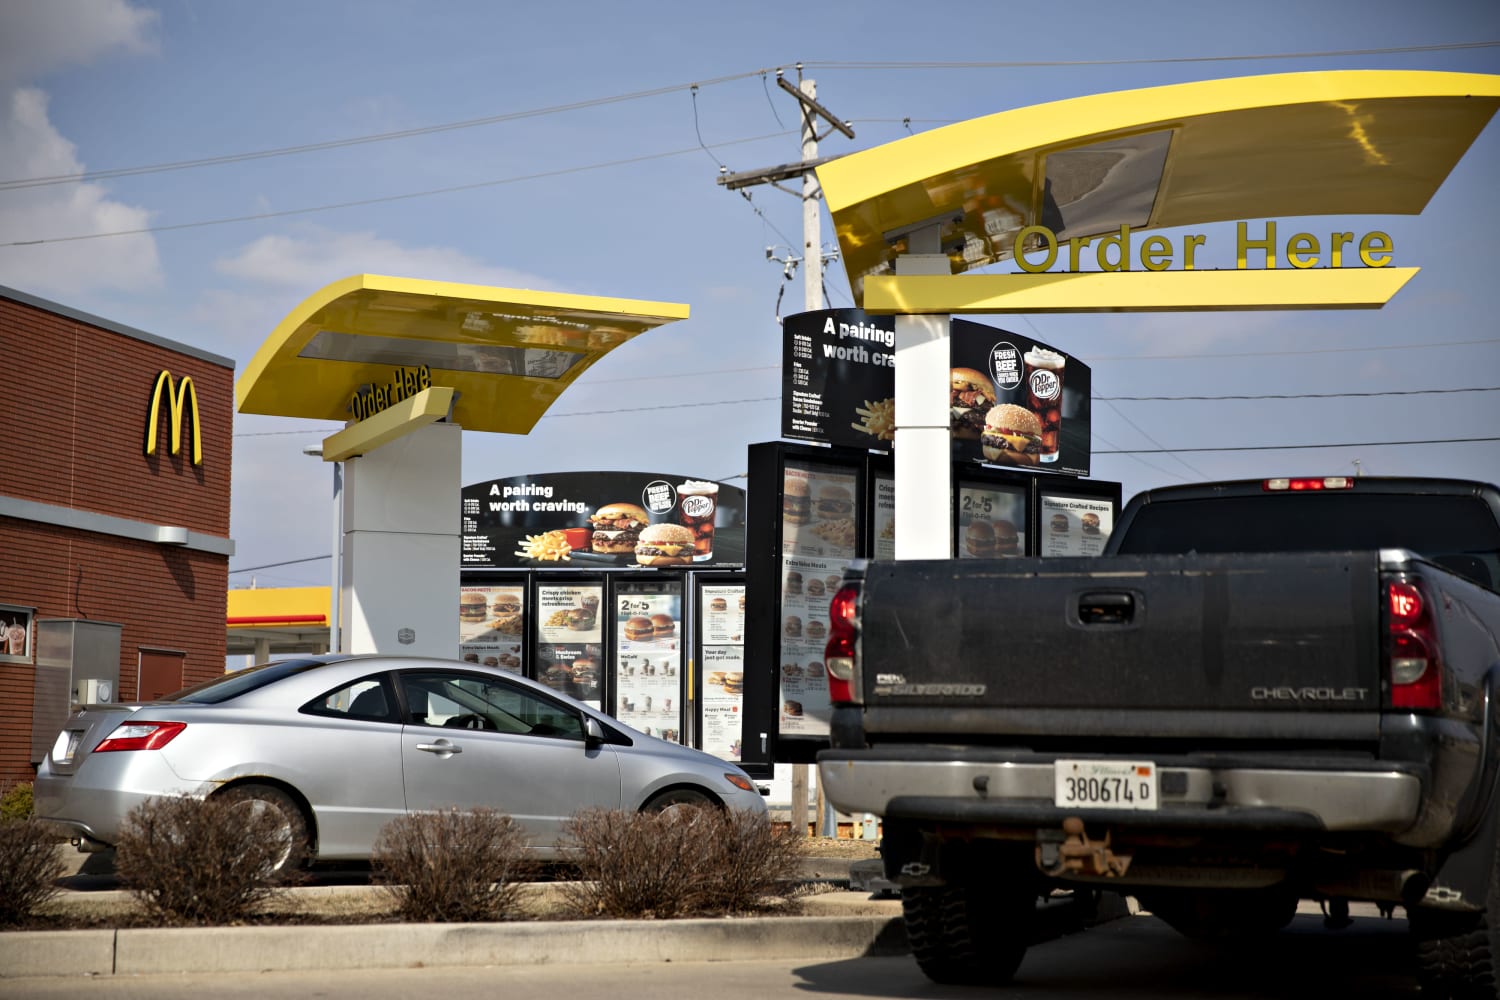 McDonald's is testing automated drive-thru ordering at 10 Chicago restaurants